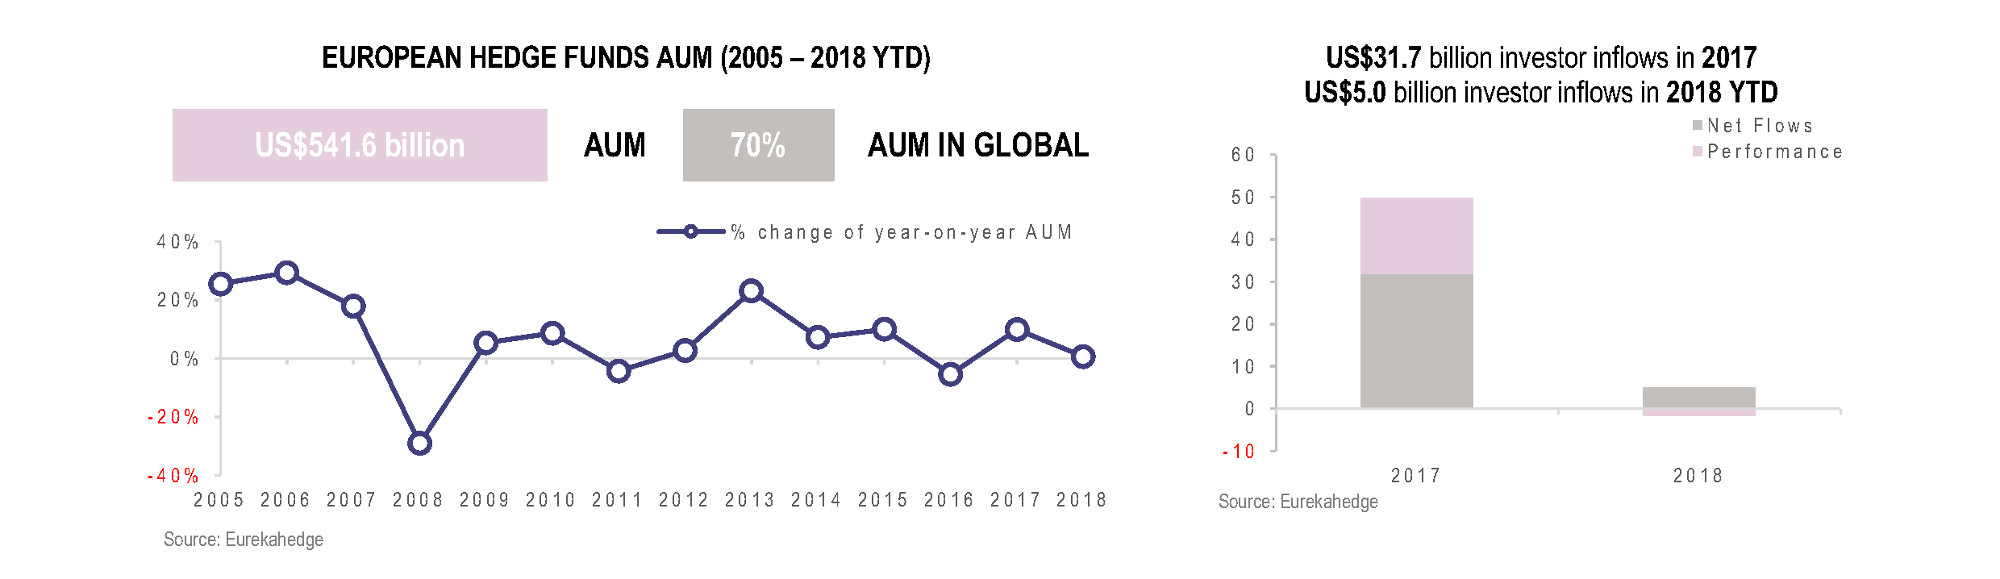 European Hedge Funds Infographic July 2018 - AUM